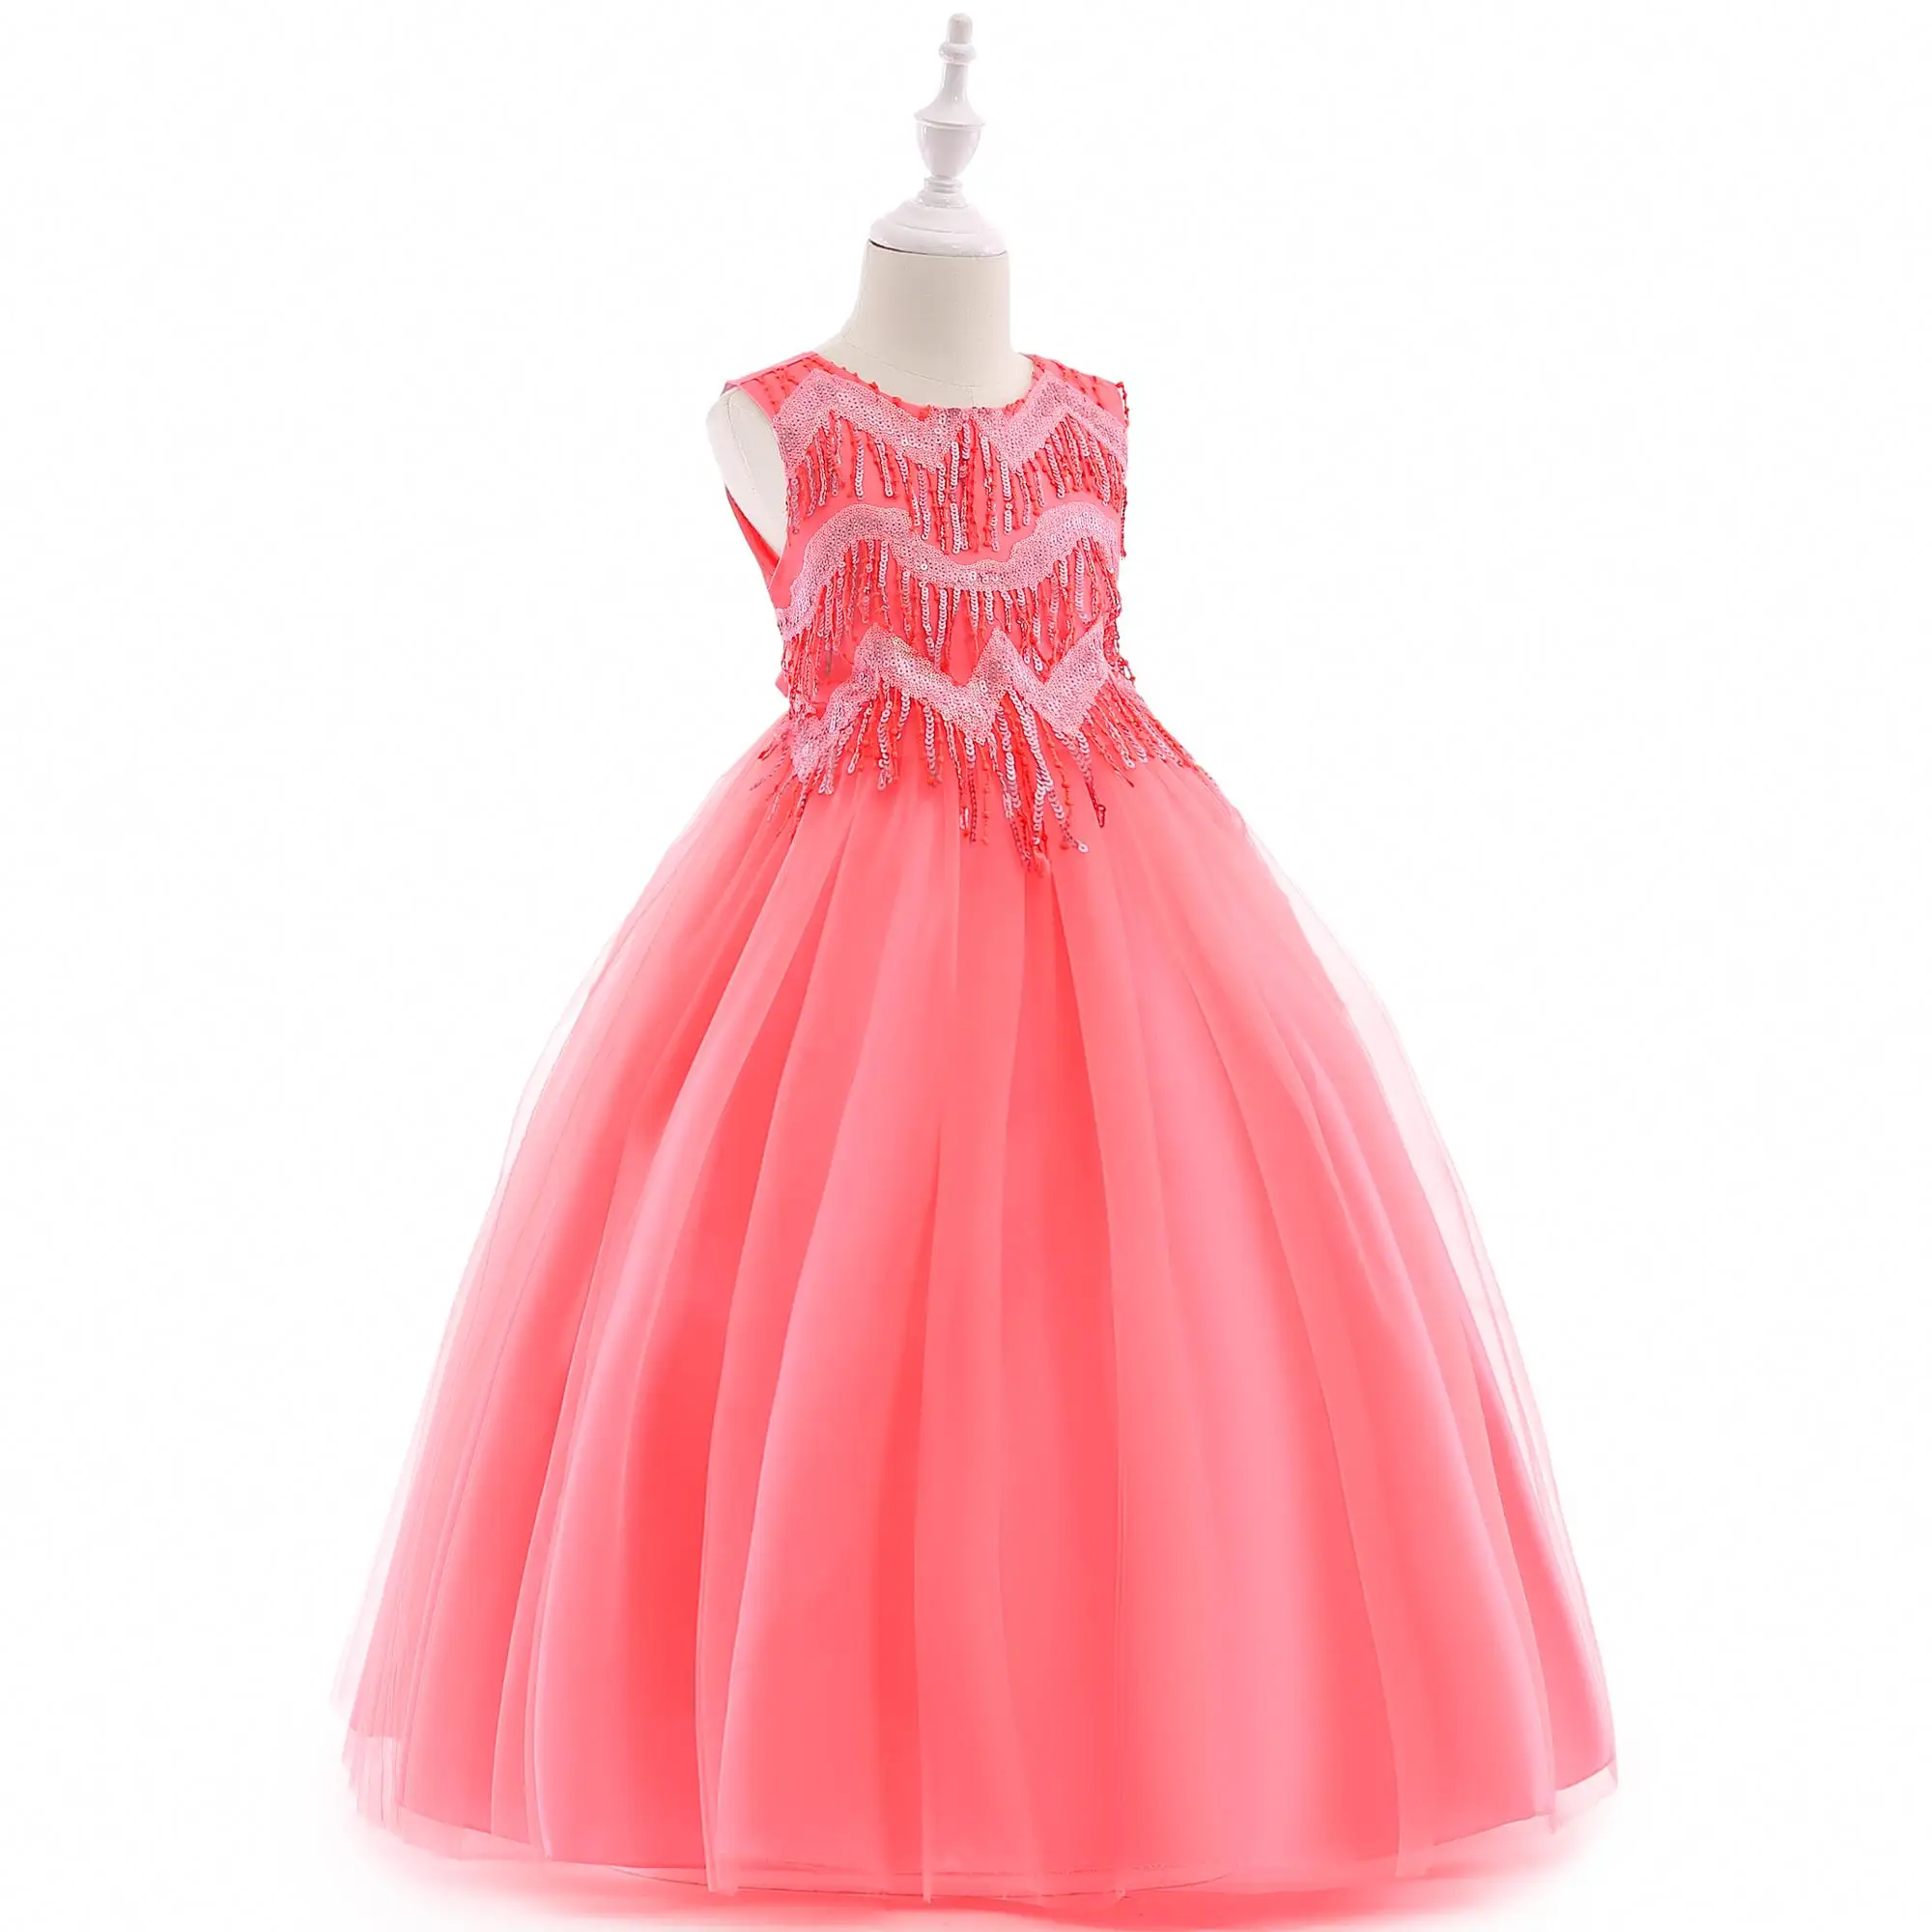 

Children Long Frocks Designs Big Girl Fancy Gowns Birthday Wedding Party Dress Wholesale LP-206, As picture